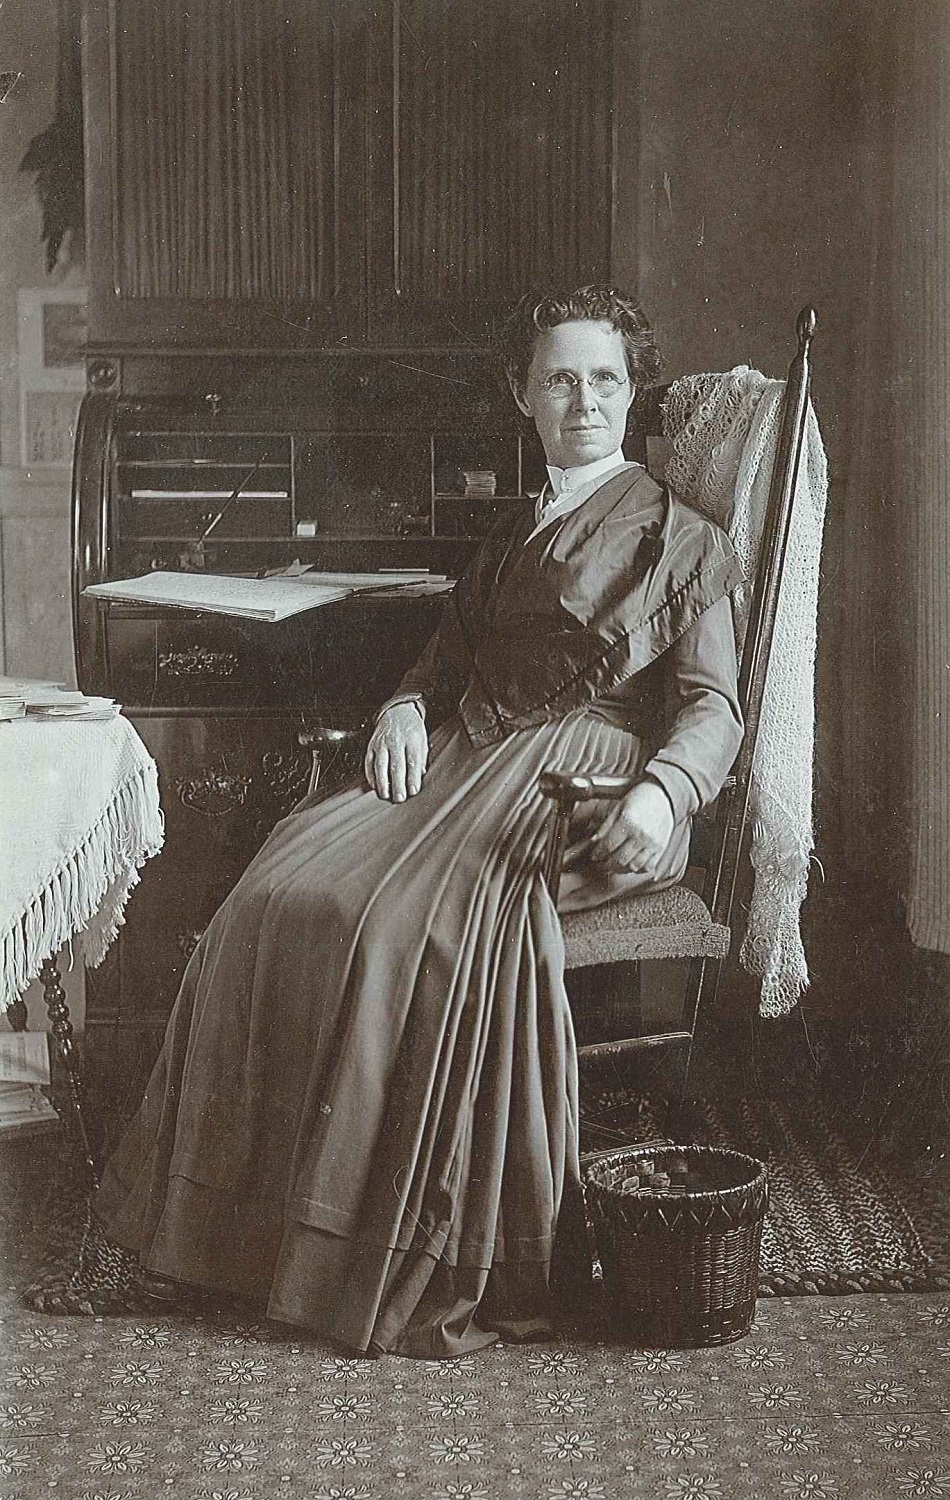 An old photo of a woman sitting in a chair.